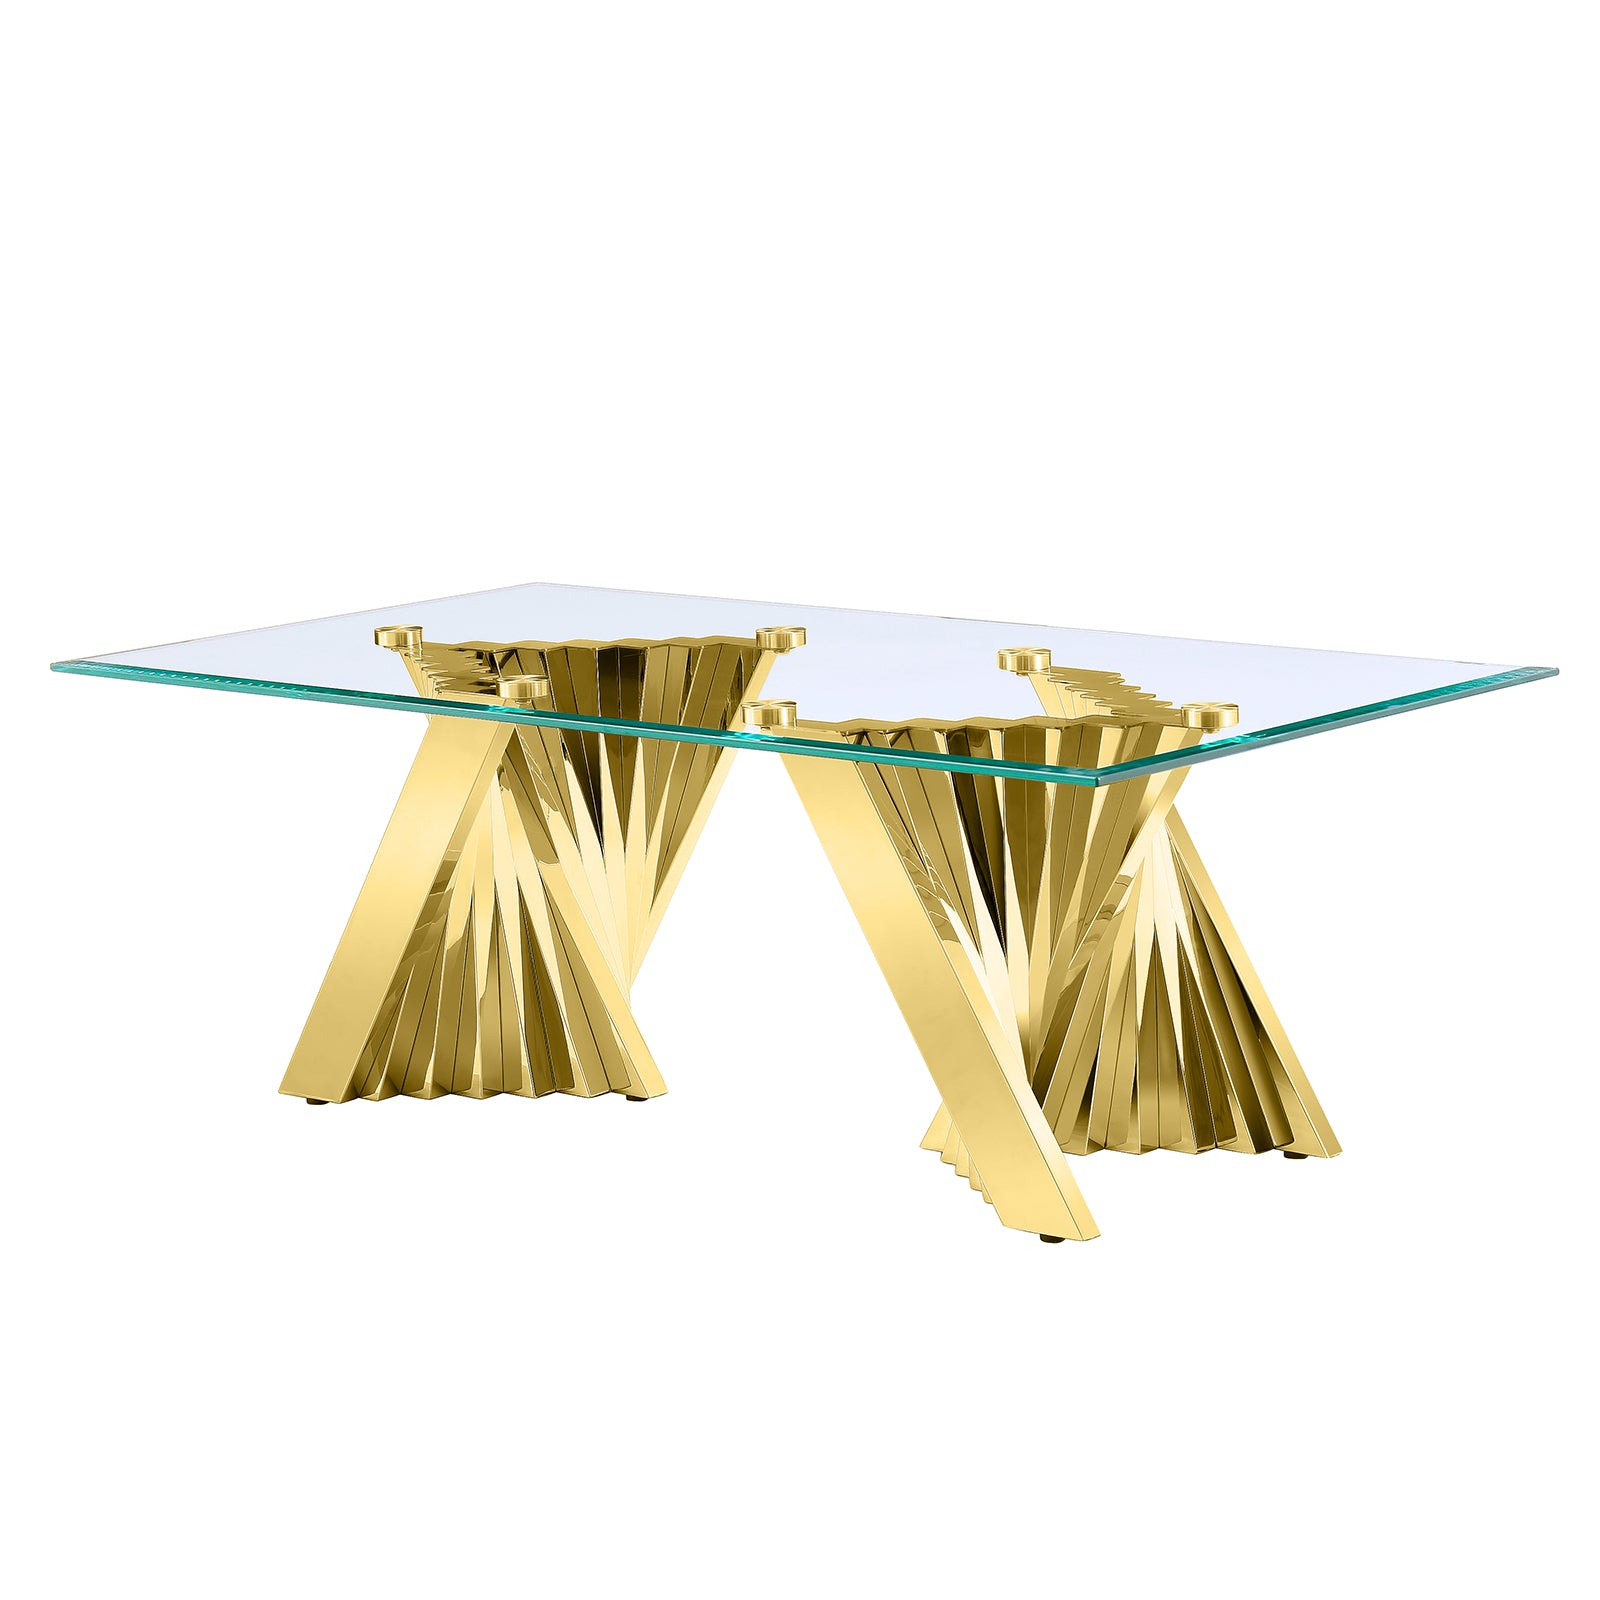 The Benefits and Value of a Glass Gold Coffee Table for Your Living Room